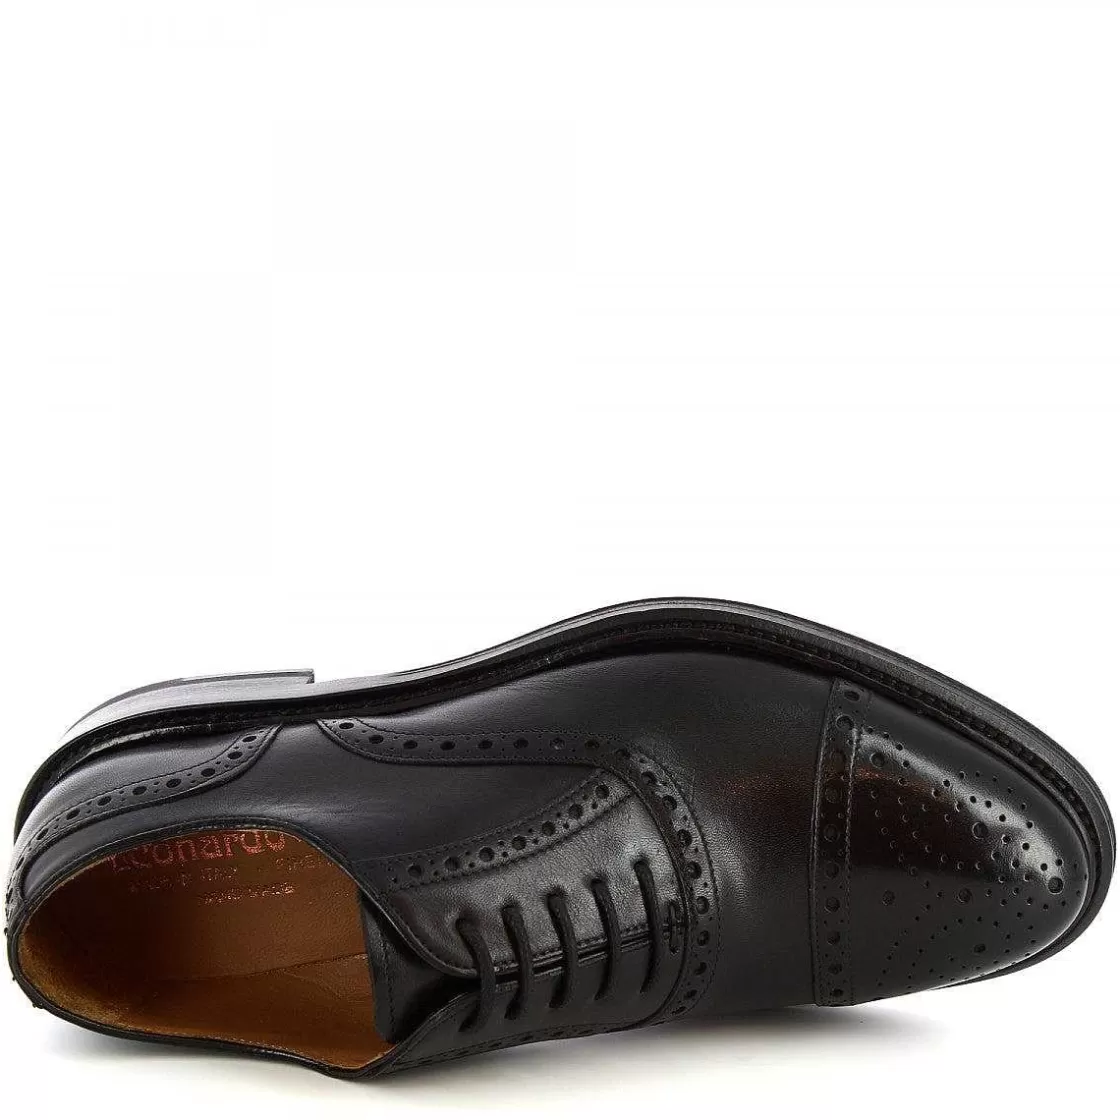 Leonardo Handmade Brogues Brogues Shoes For Men In Black Calf Leather Clearance